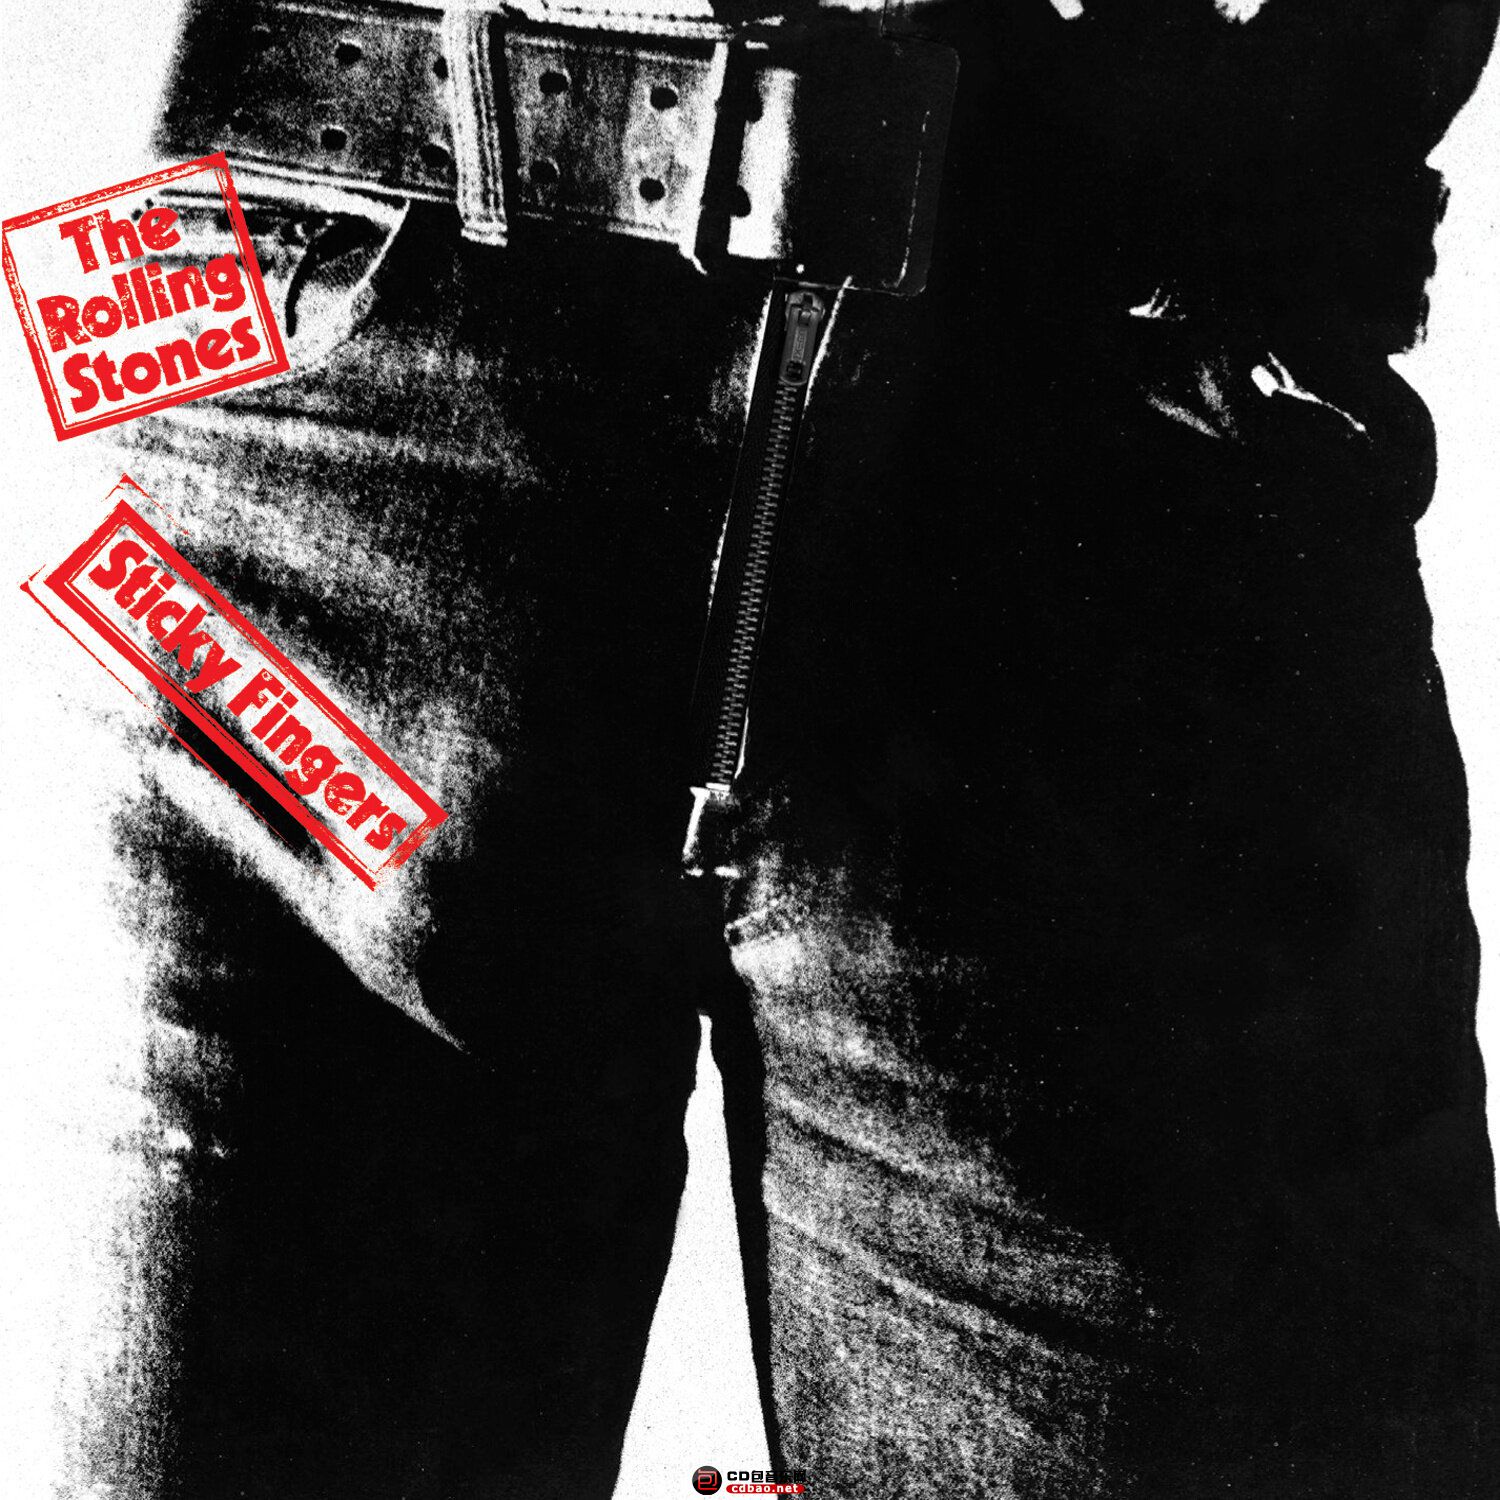 The Rolling Stones - Sticky Fingers.jpg